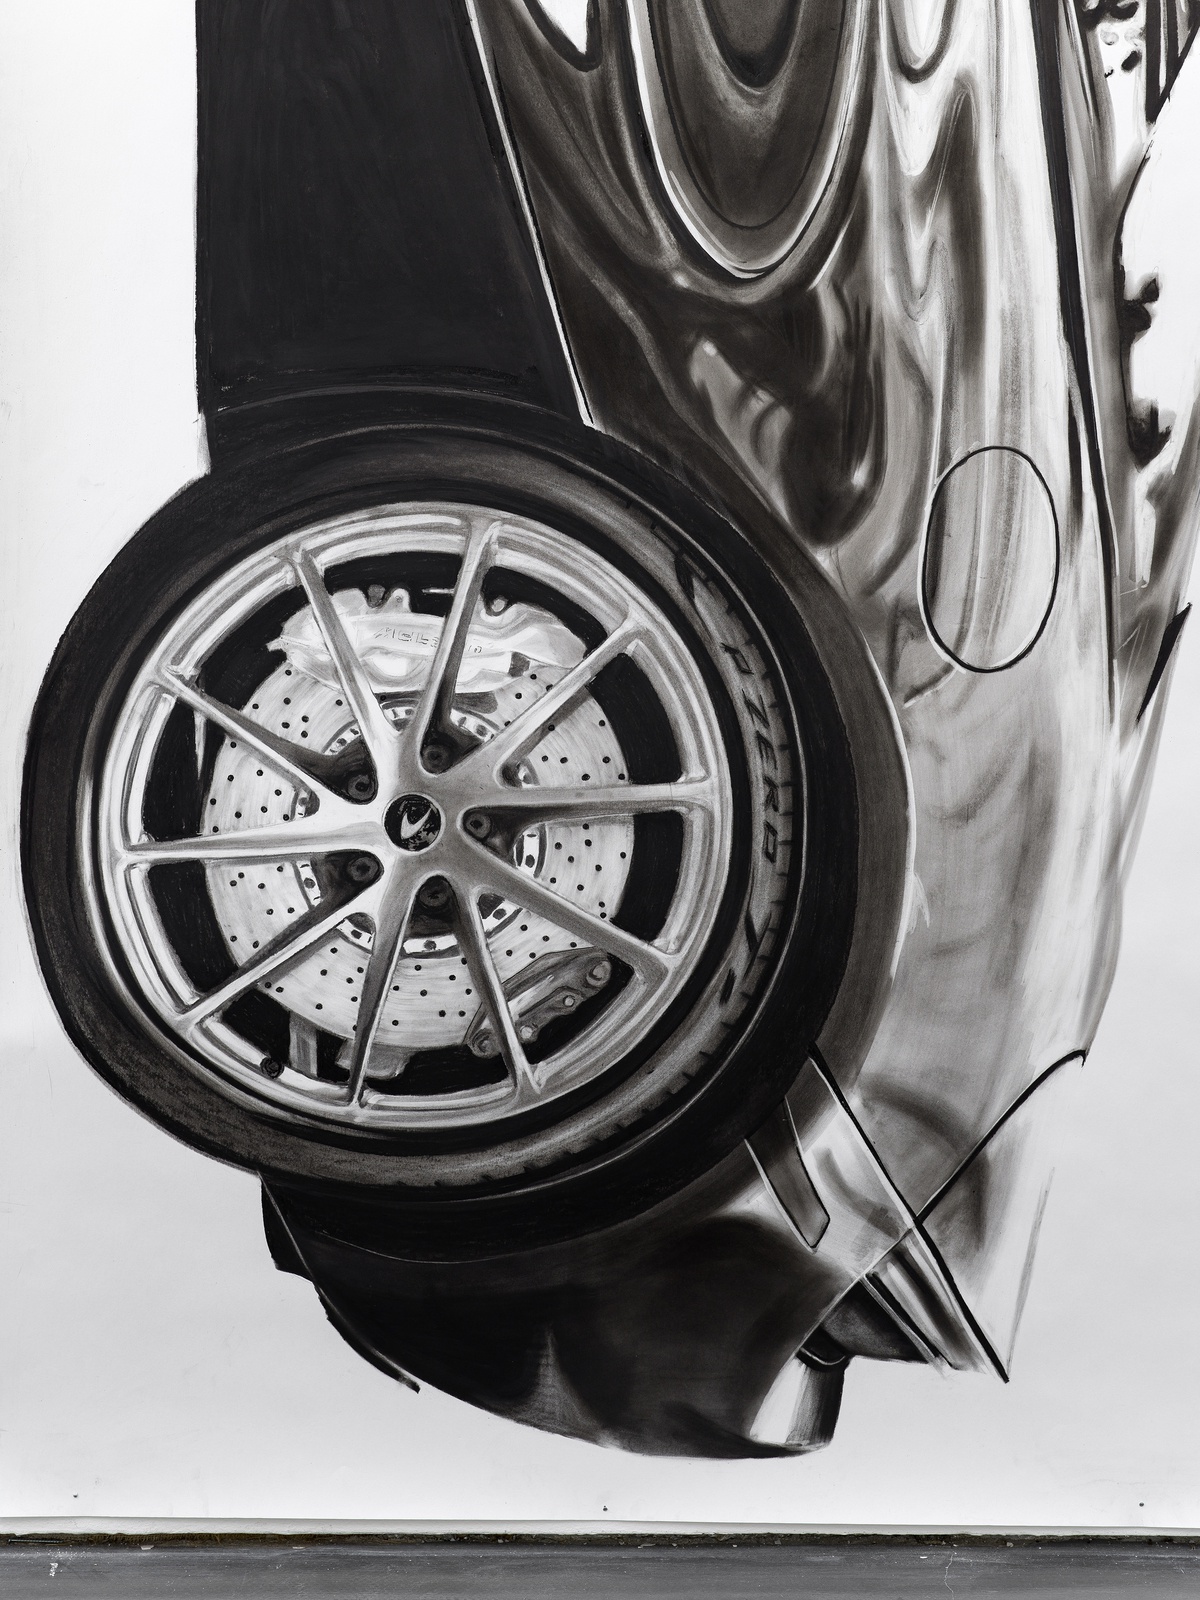 Mclaren 720s (Beauty of the beast), 2022 (Detail)Charcoal on Paper